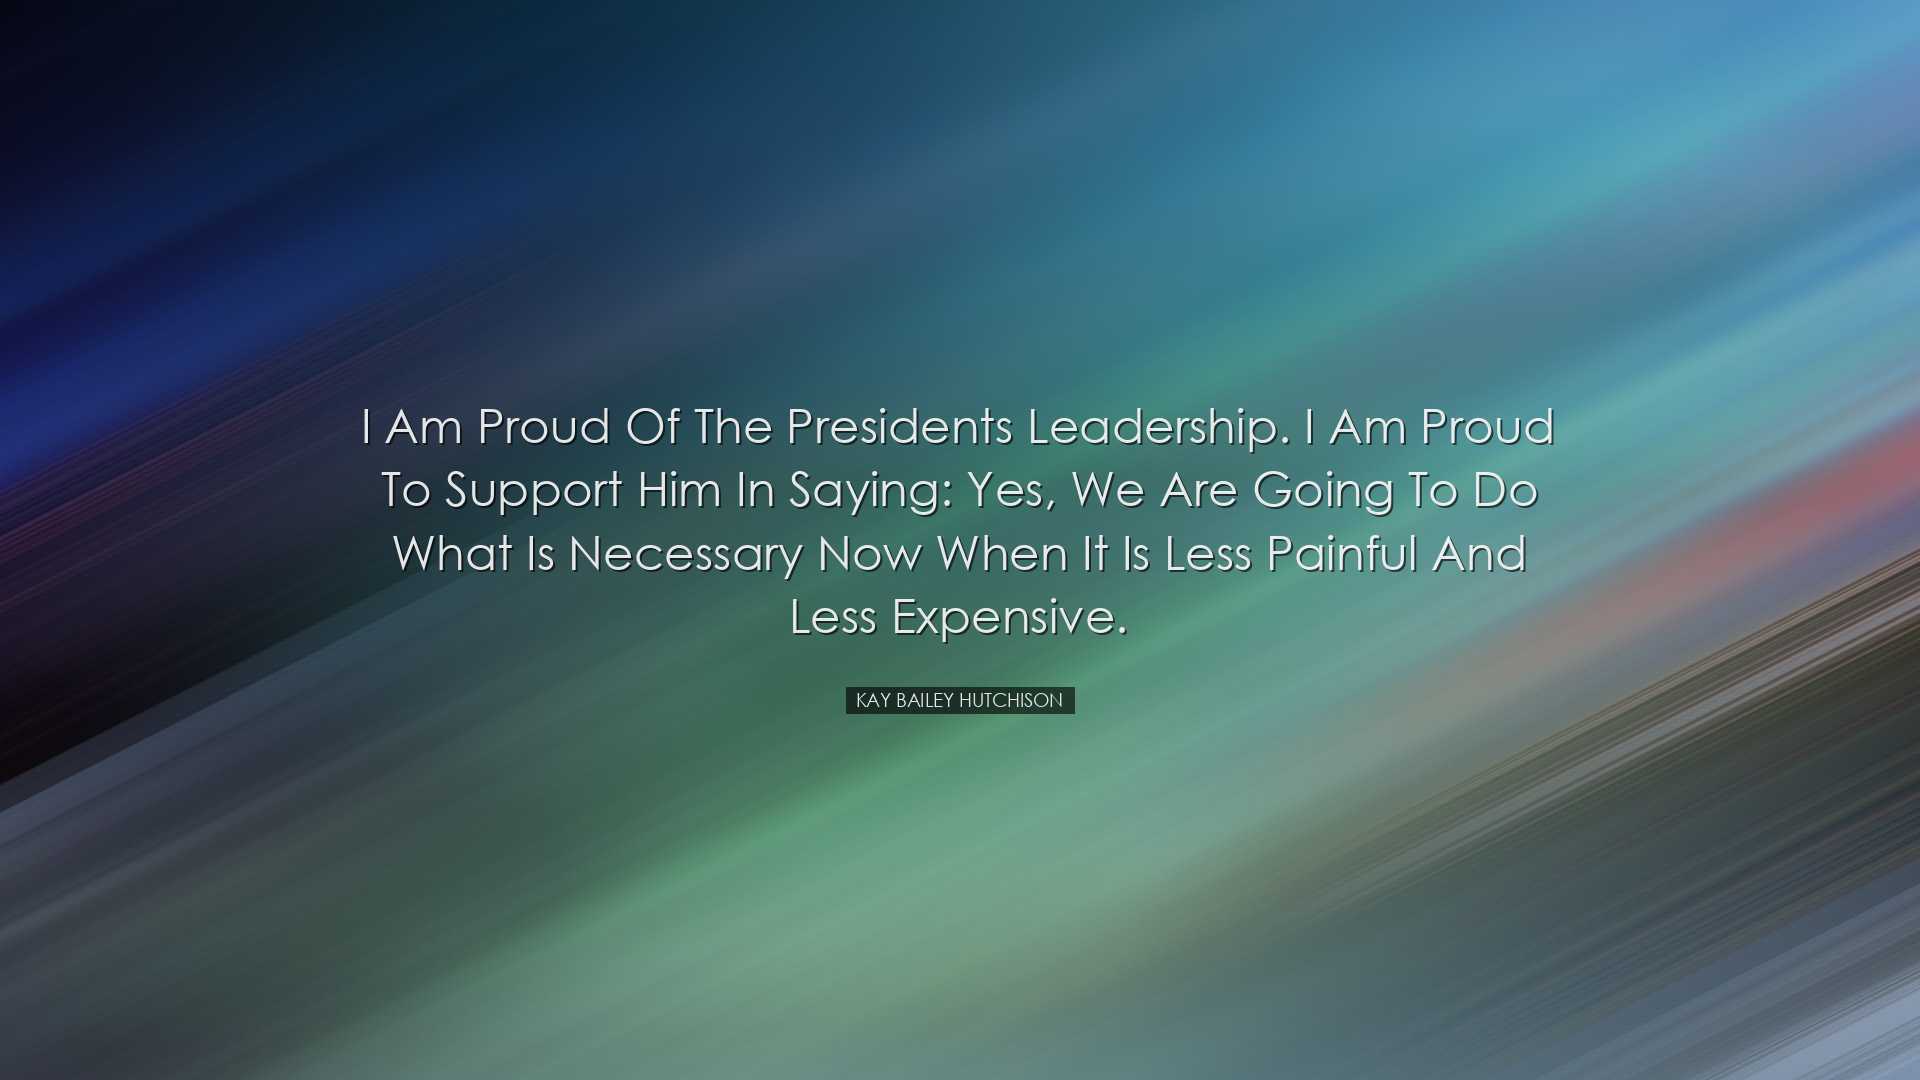 I am proud of the Presidents leadership. I am proud to support him